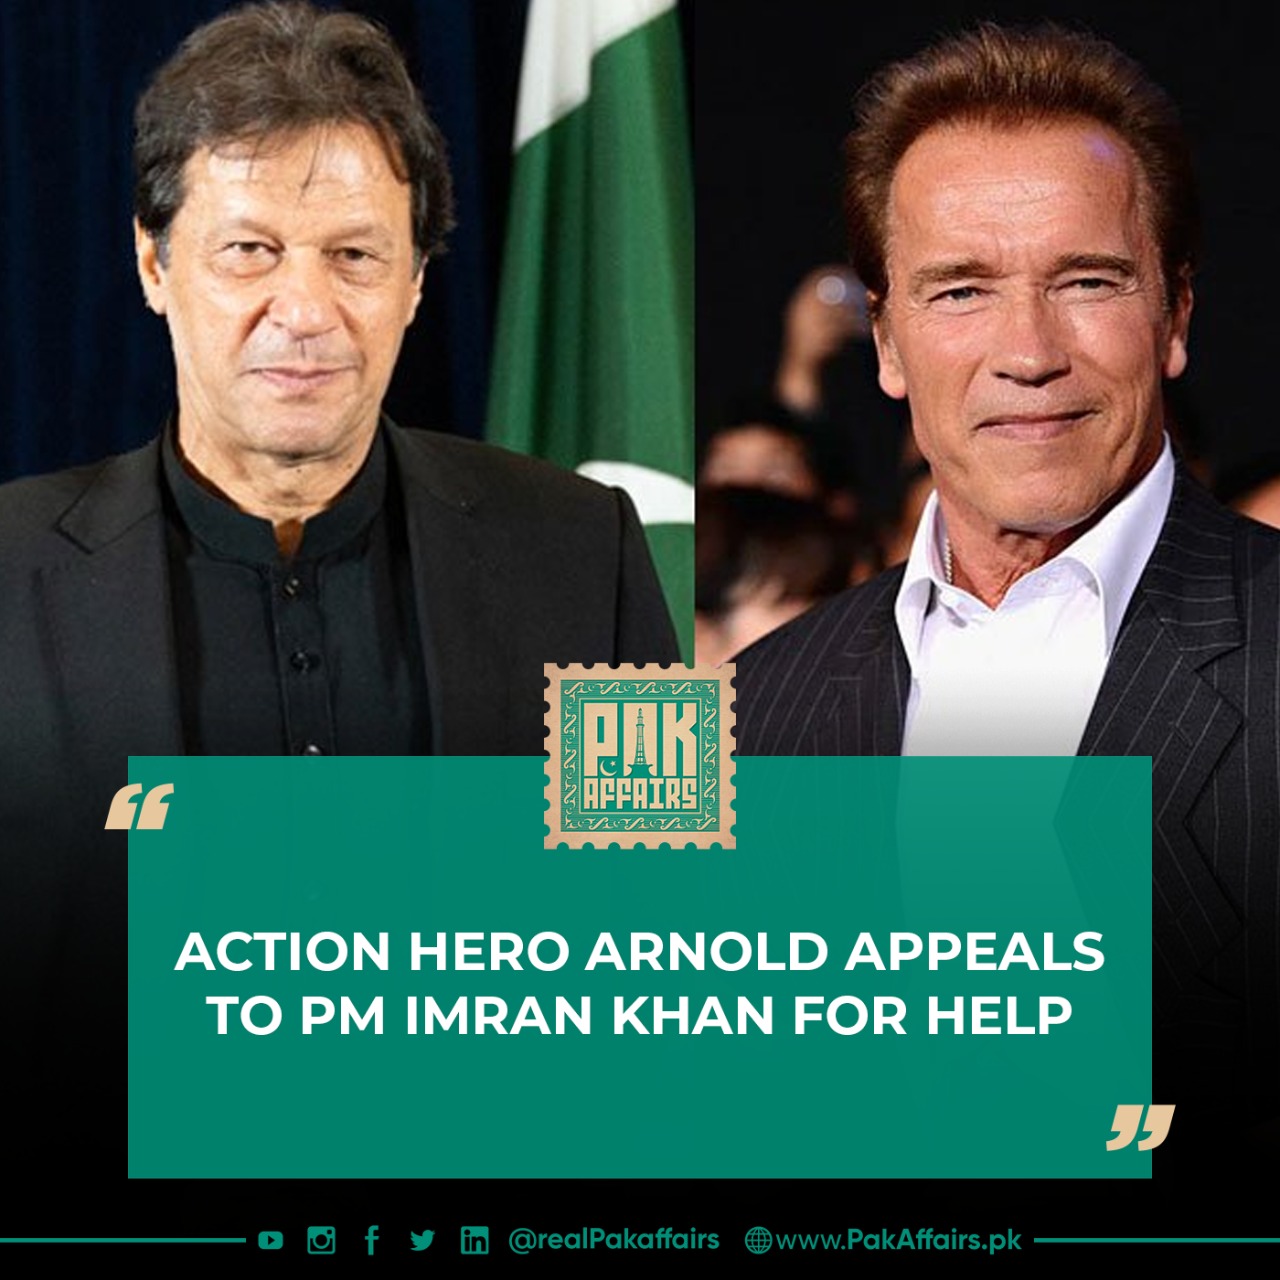 Action hero Arnold appeals to PM Imran Khan for help.